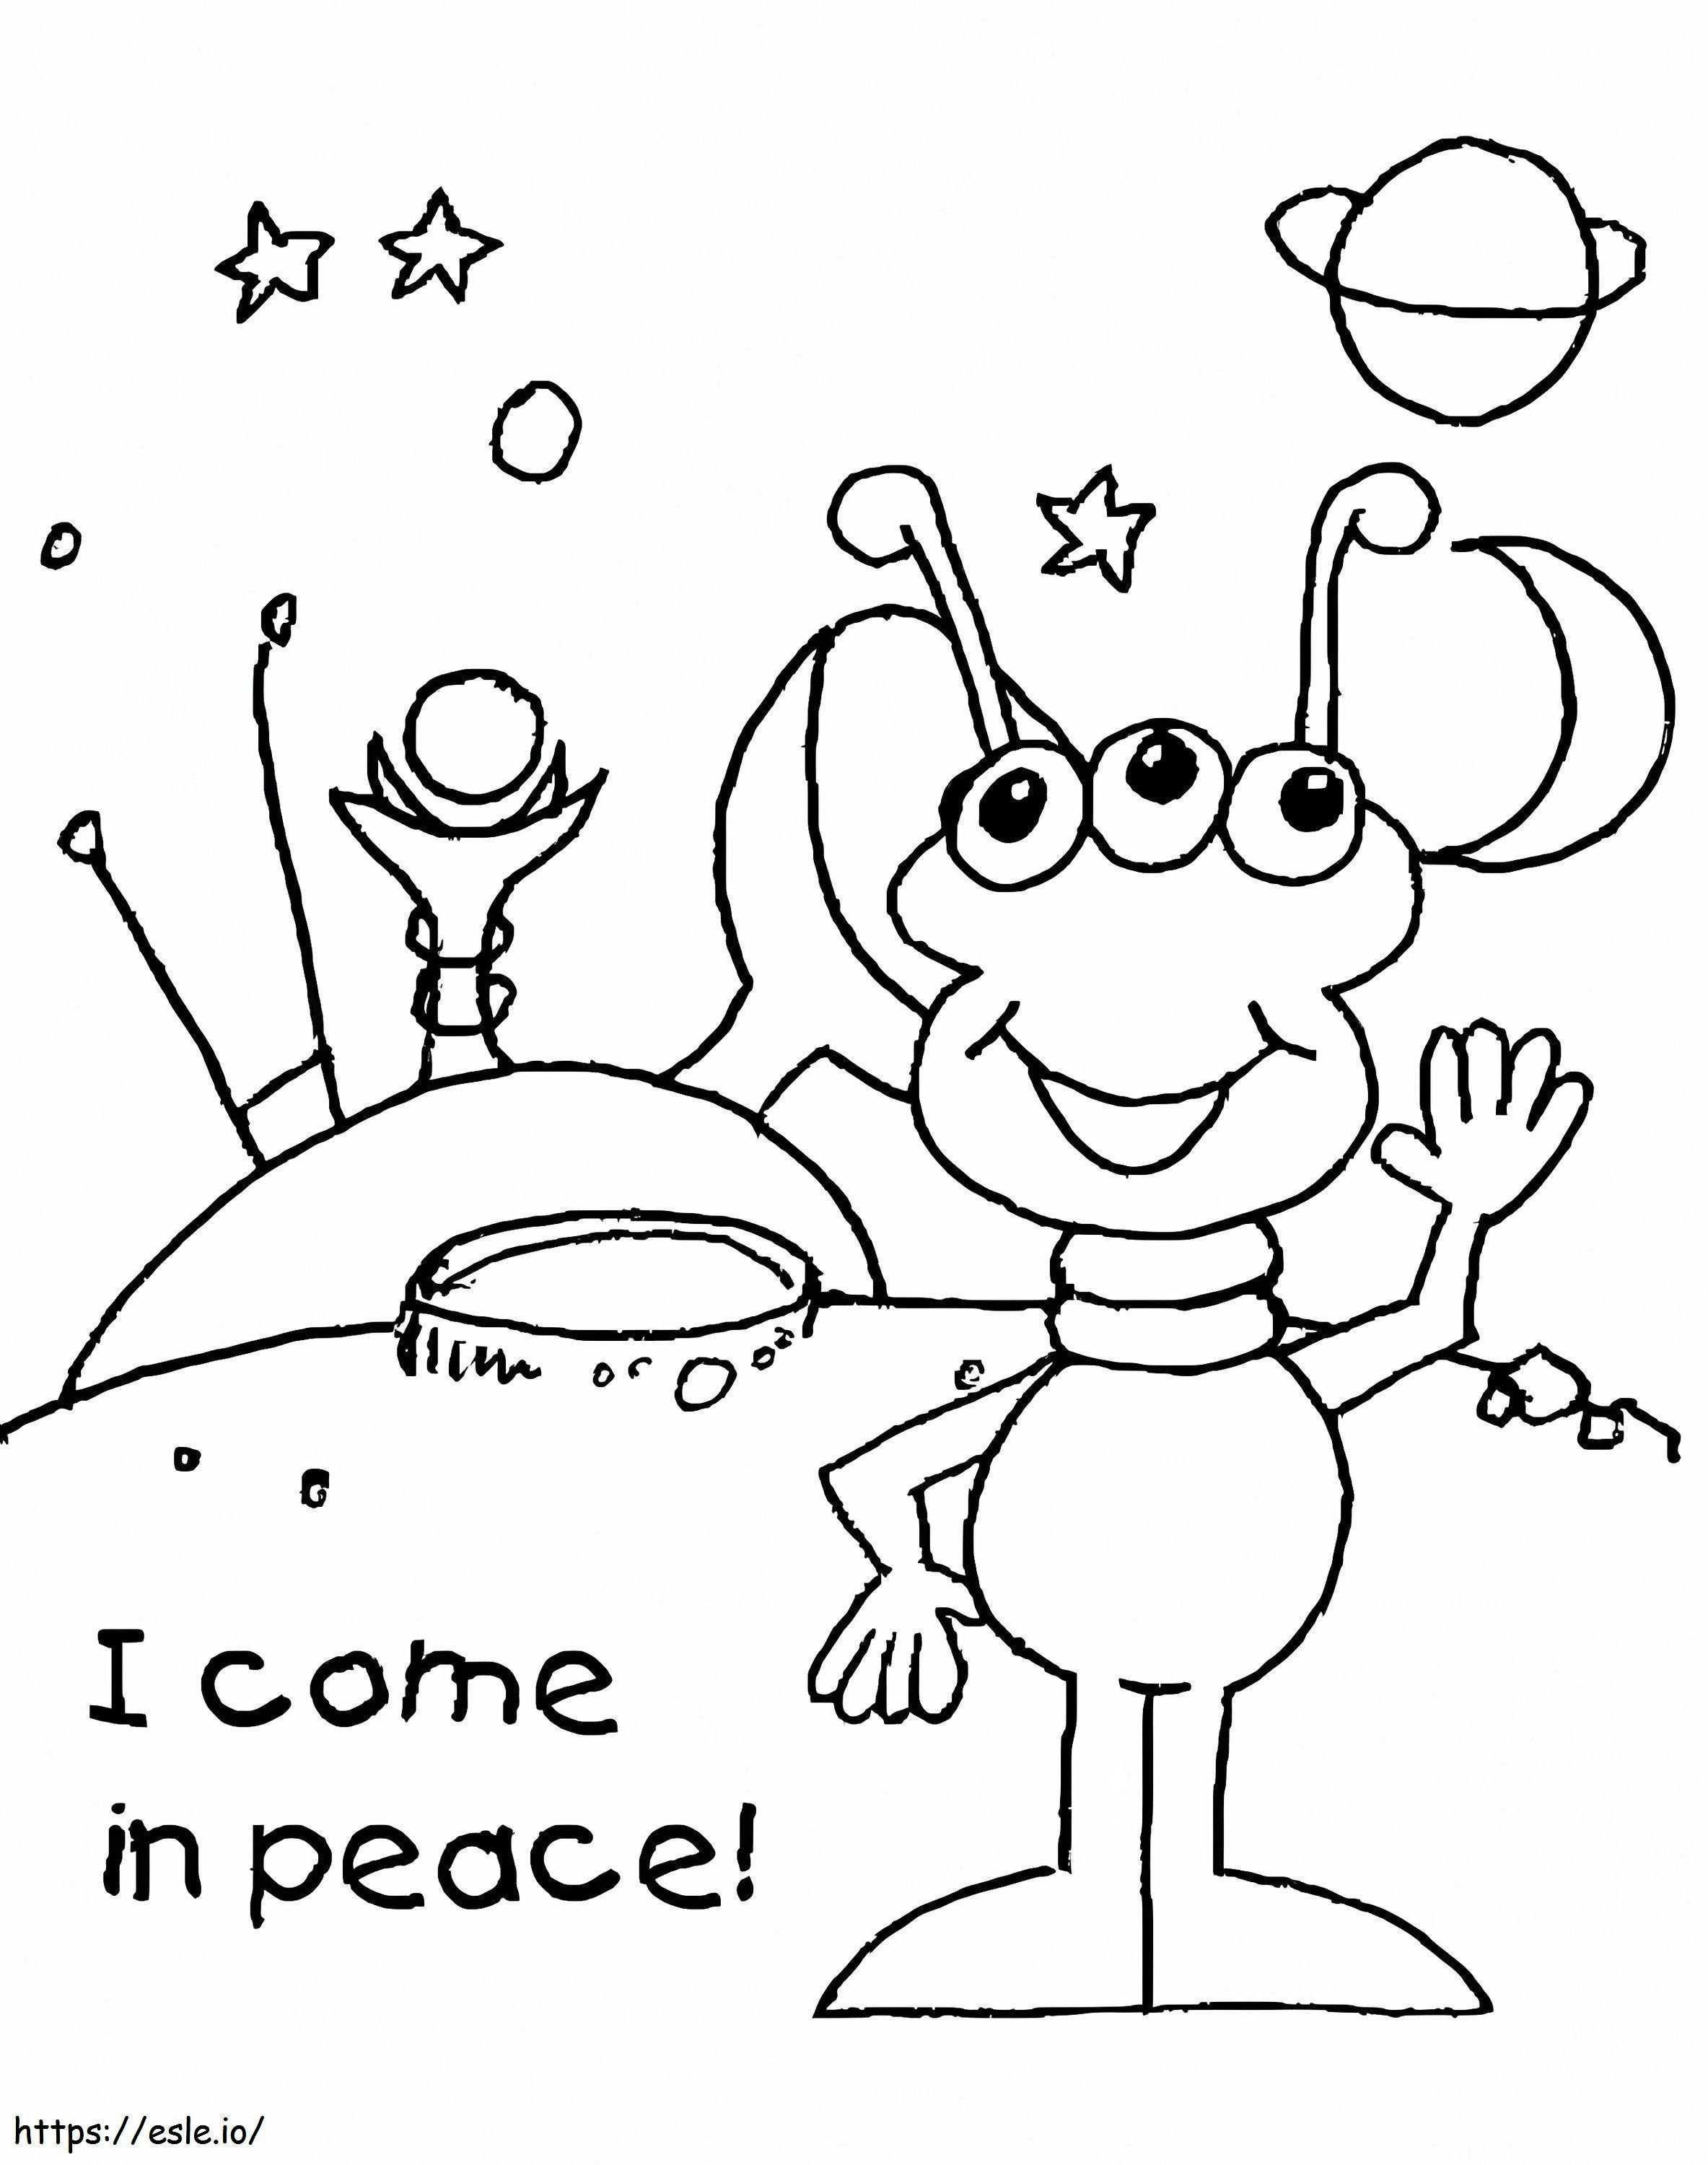 Space Alien coloring page